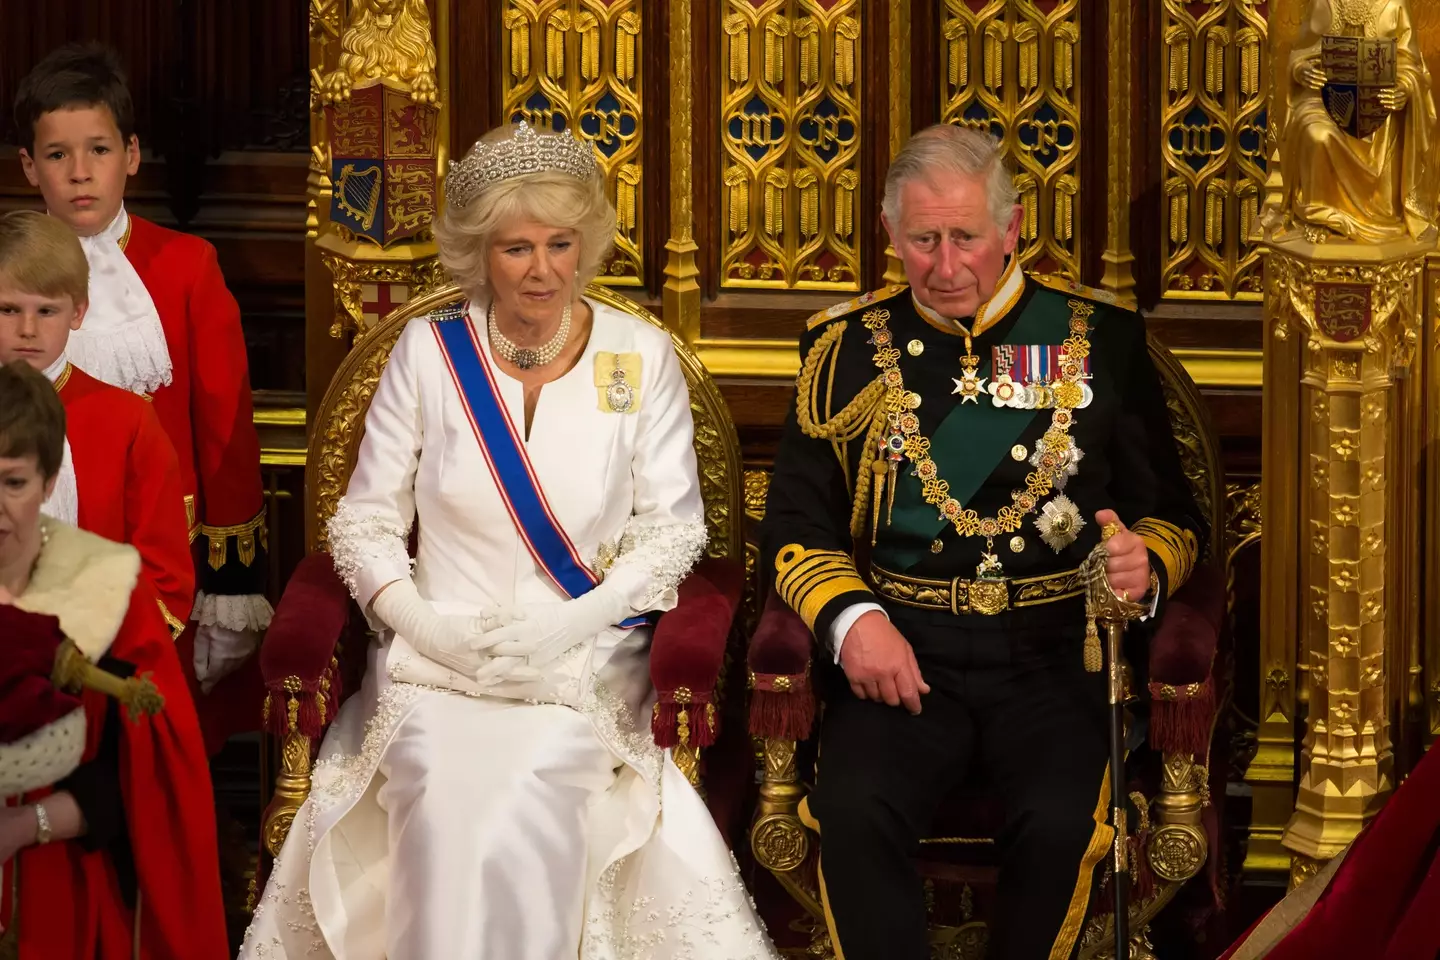 King Charles III and Queen Consort.